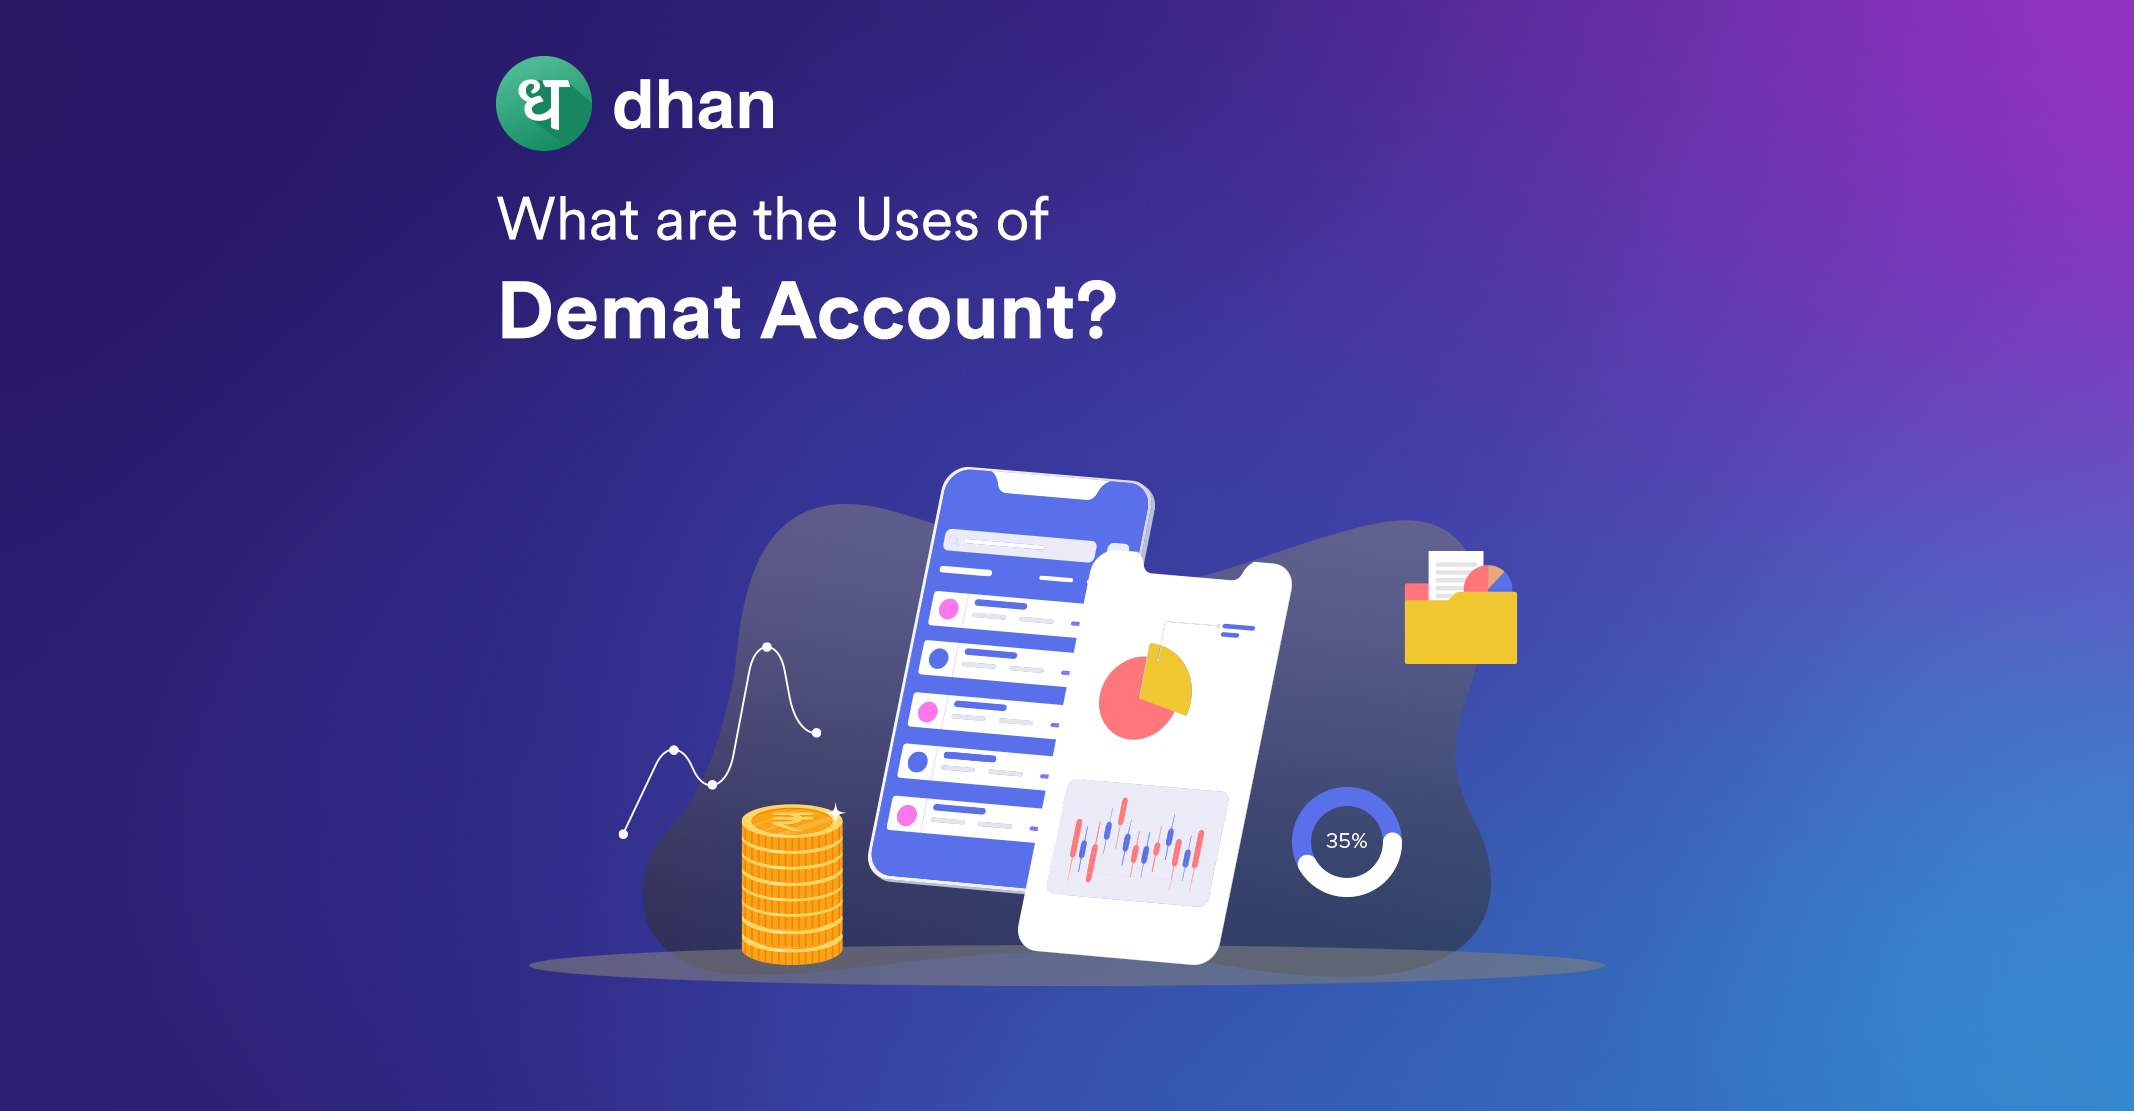 What are the Uses of Demat Account